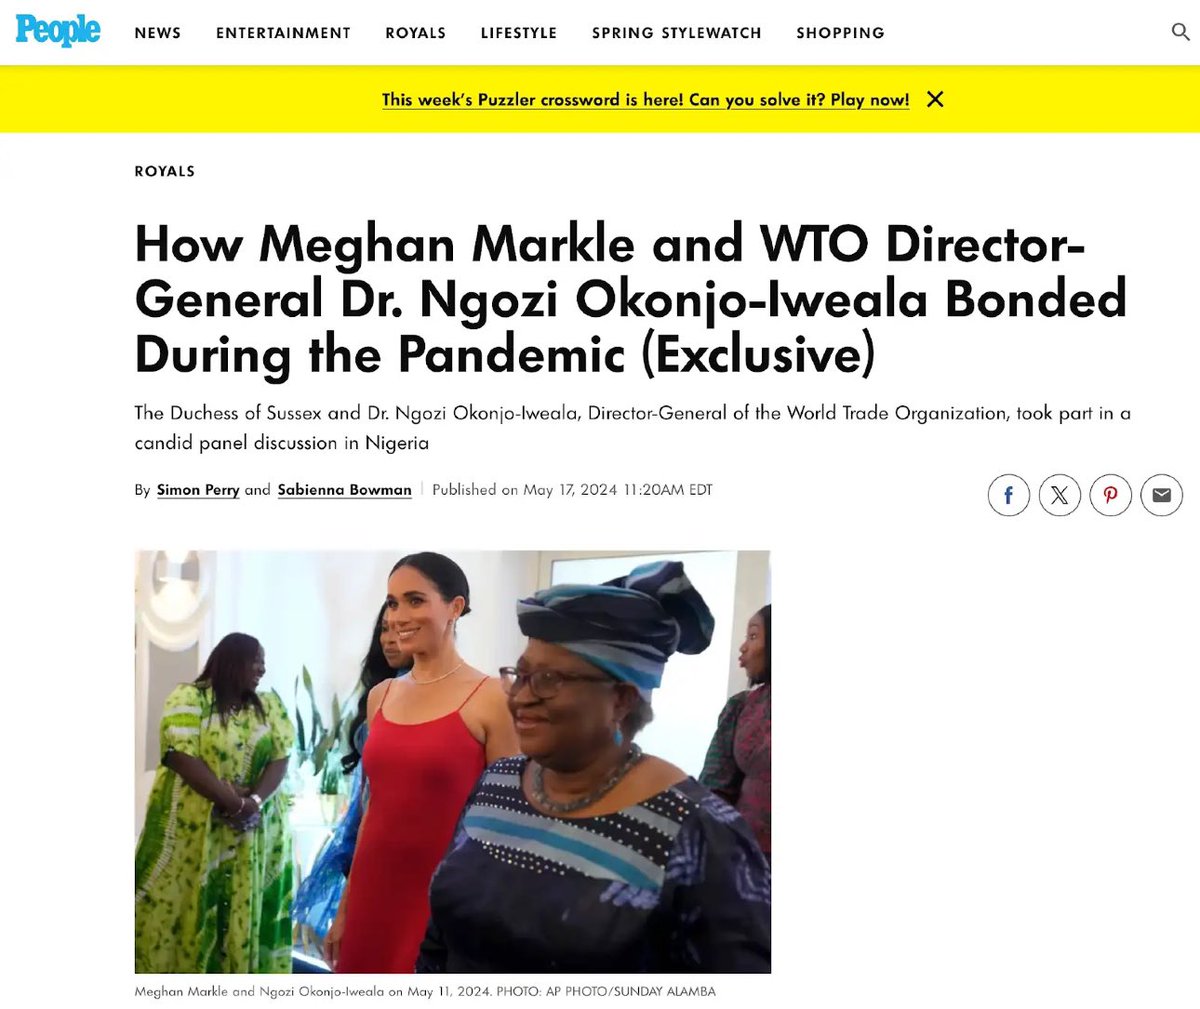 Meghan Markle making some serious money off all these @people Exclusives Not only did Harry & Meghan charge an appearance fee to the Department of Defense in Nigeria Meghan is also lining her pockets with all the photos & magazine exclusives It was NEVER about Invictus